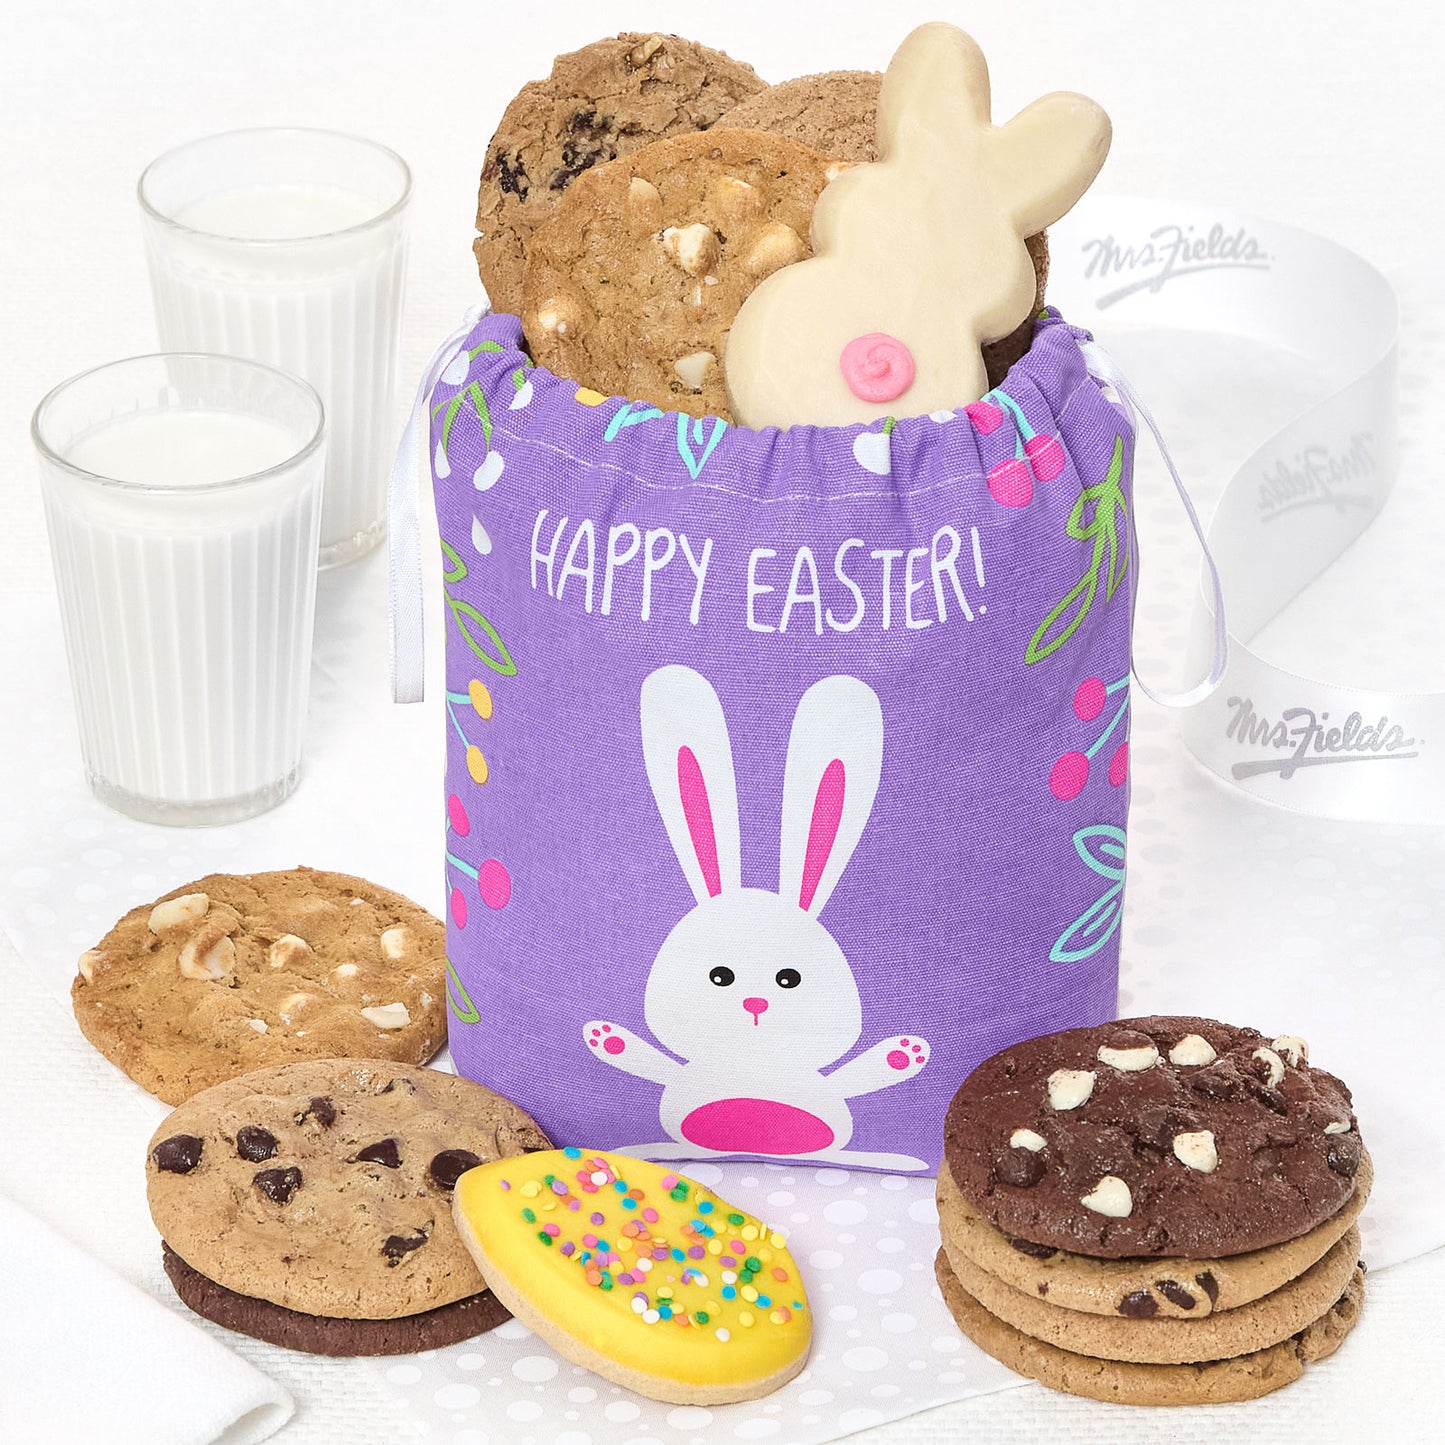 A purple Happy Easter tote filled with an assortment of original cookies, a frosted bunny cookie and a frosted egg cookie